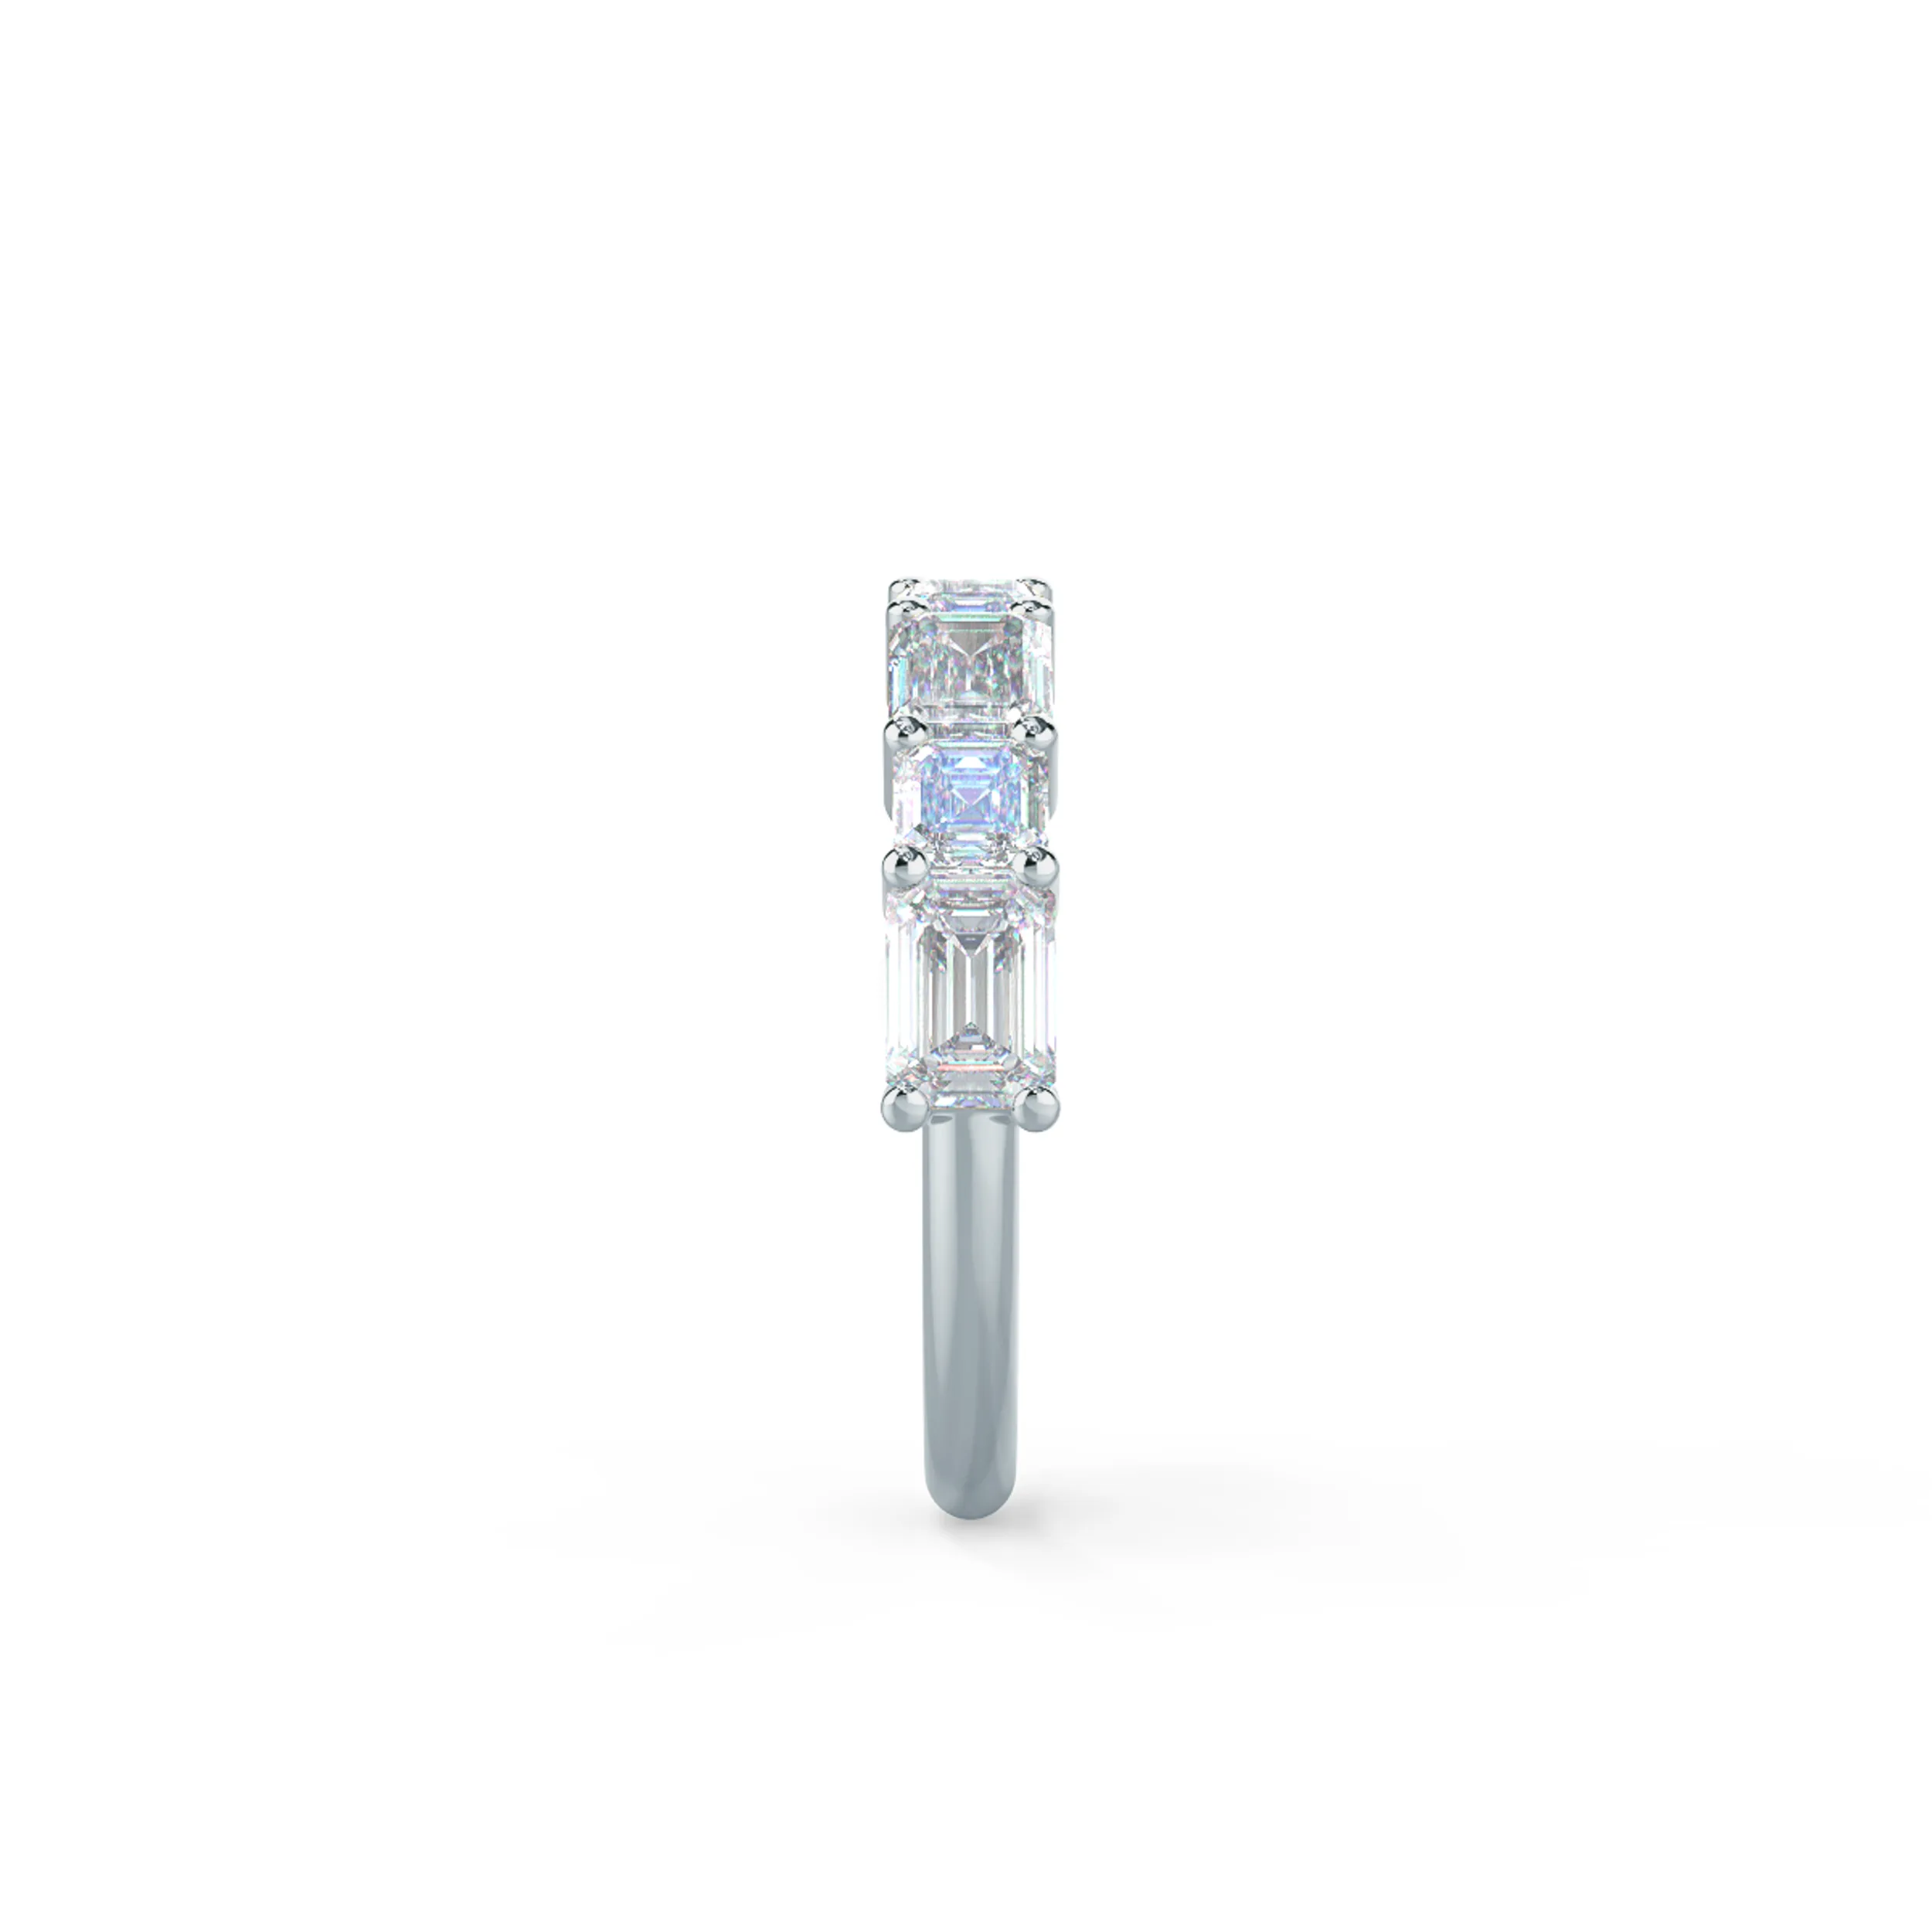 2.4 Carat Diamonds set in 18k White Gold Emerald and Asscher East-West Half Band (Side View)